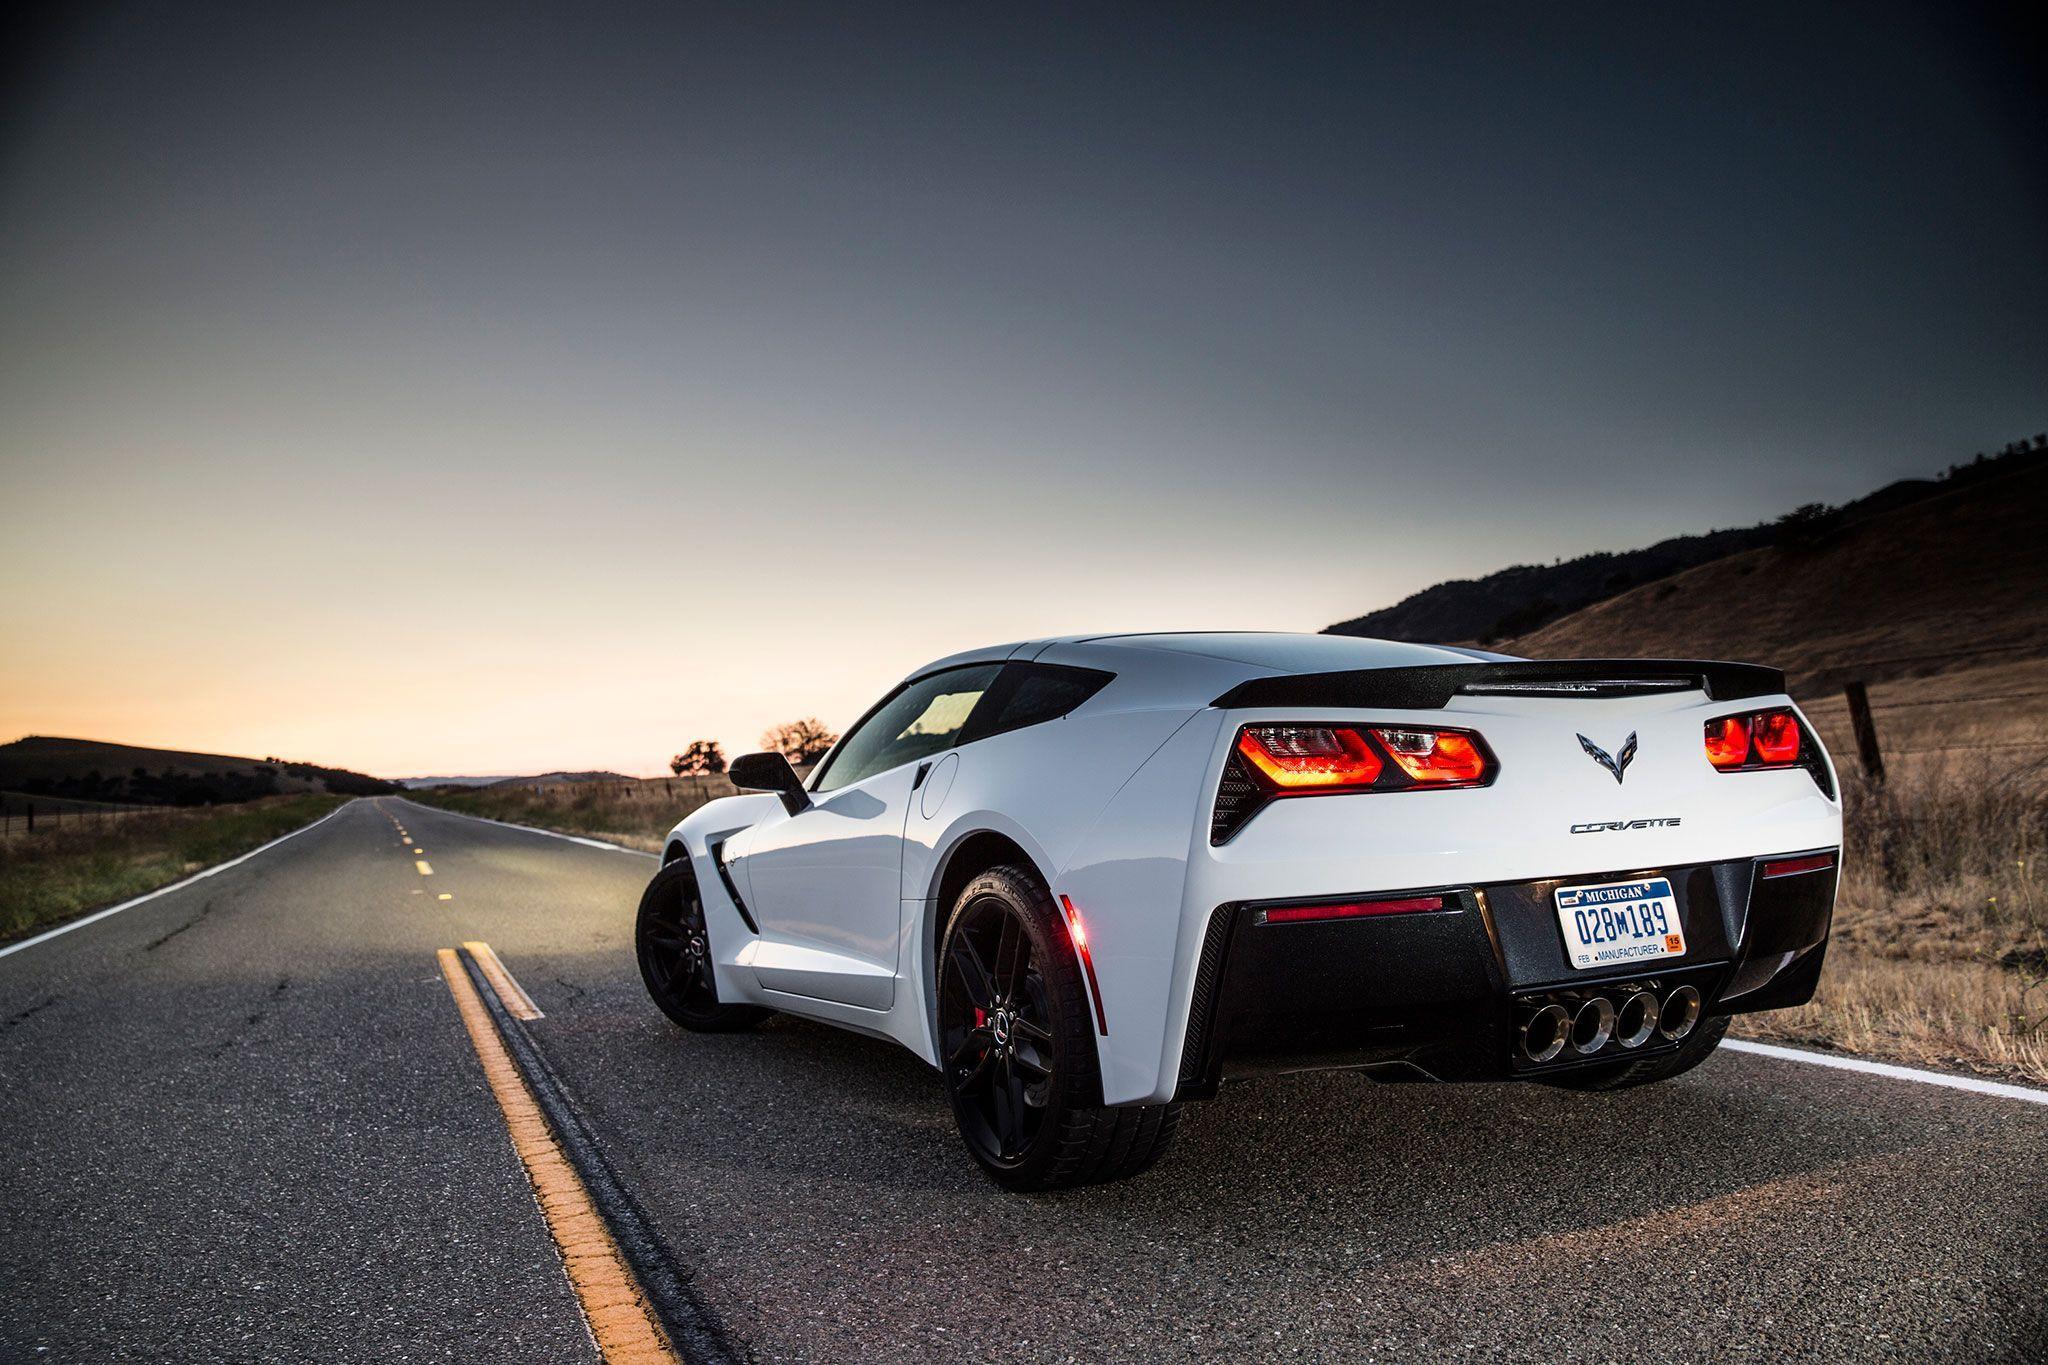 Chevrolet Corvette Stingray Eight Speed Automatic Review